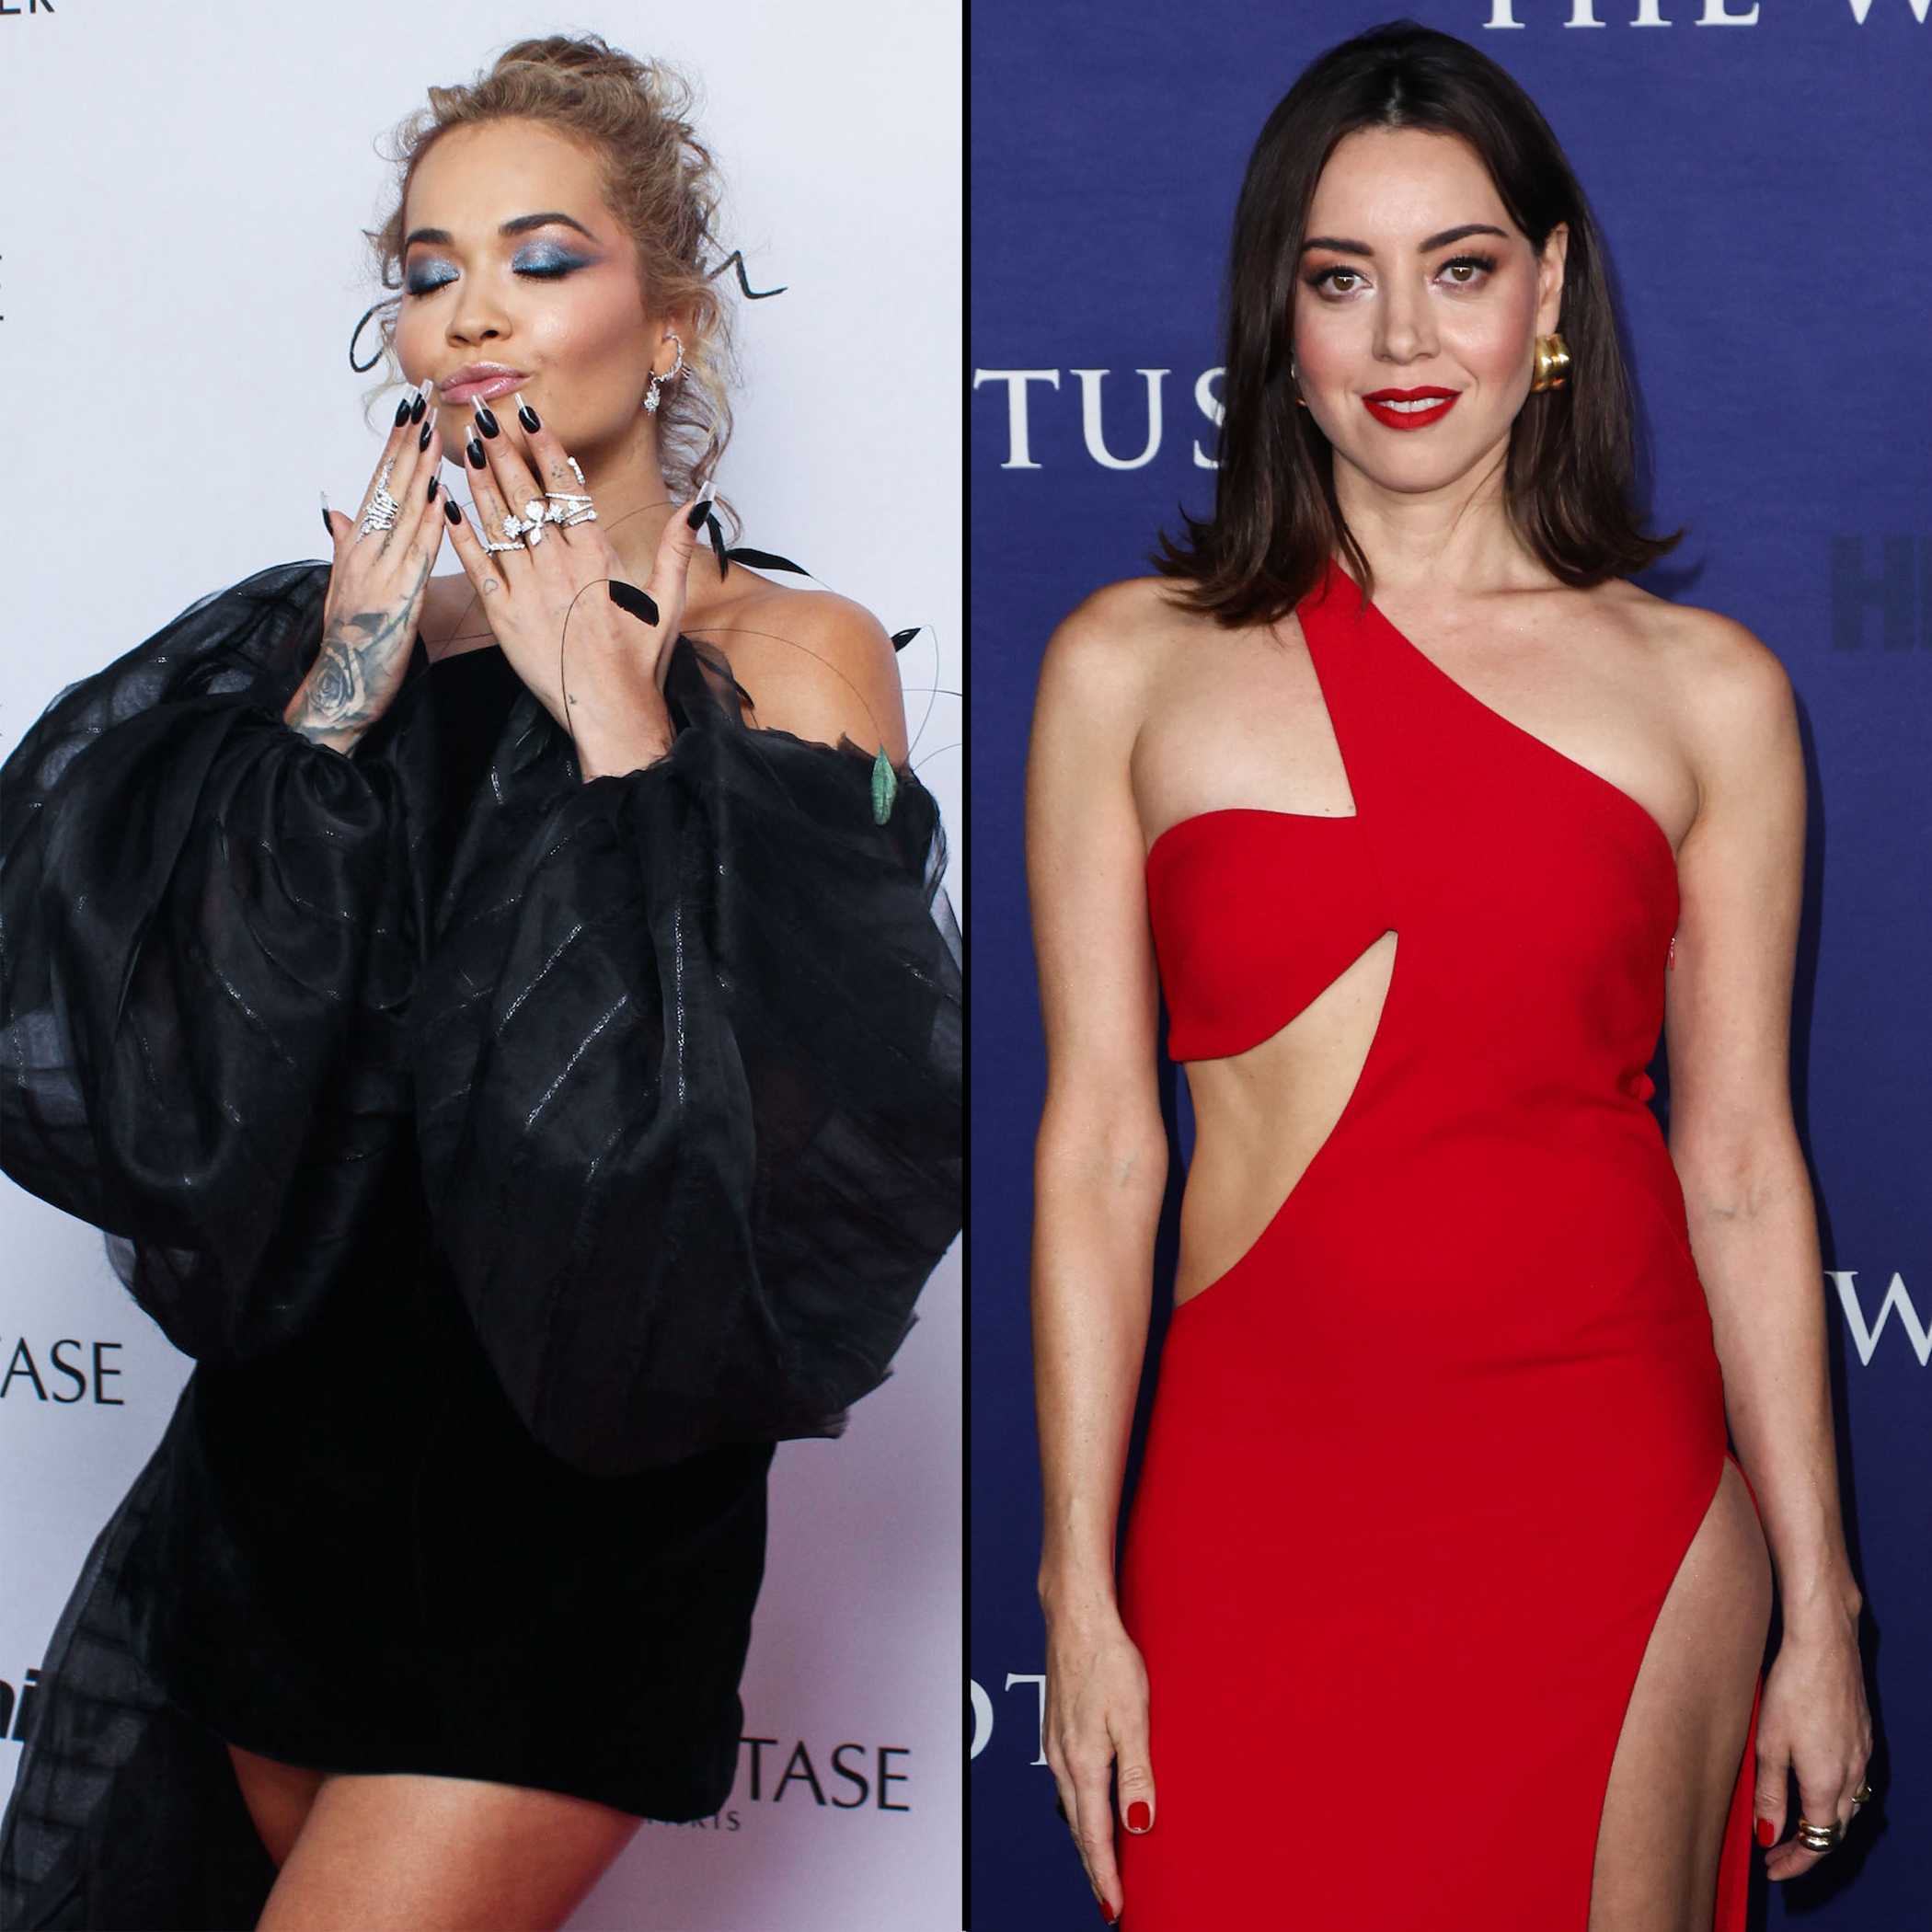 Met Gala 2023: Which Celebrities Are Attending?